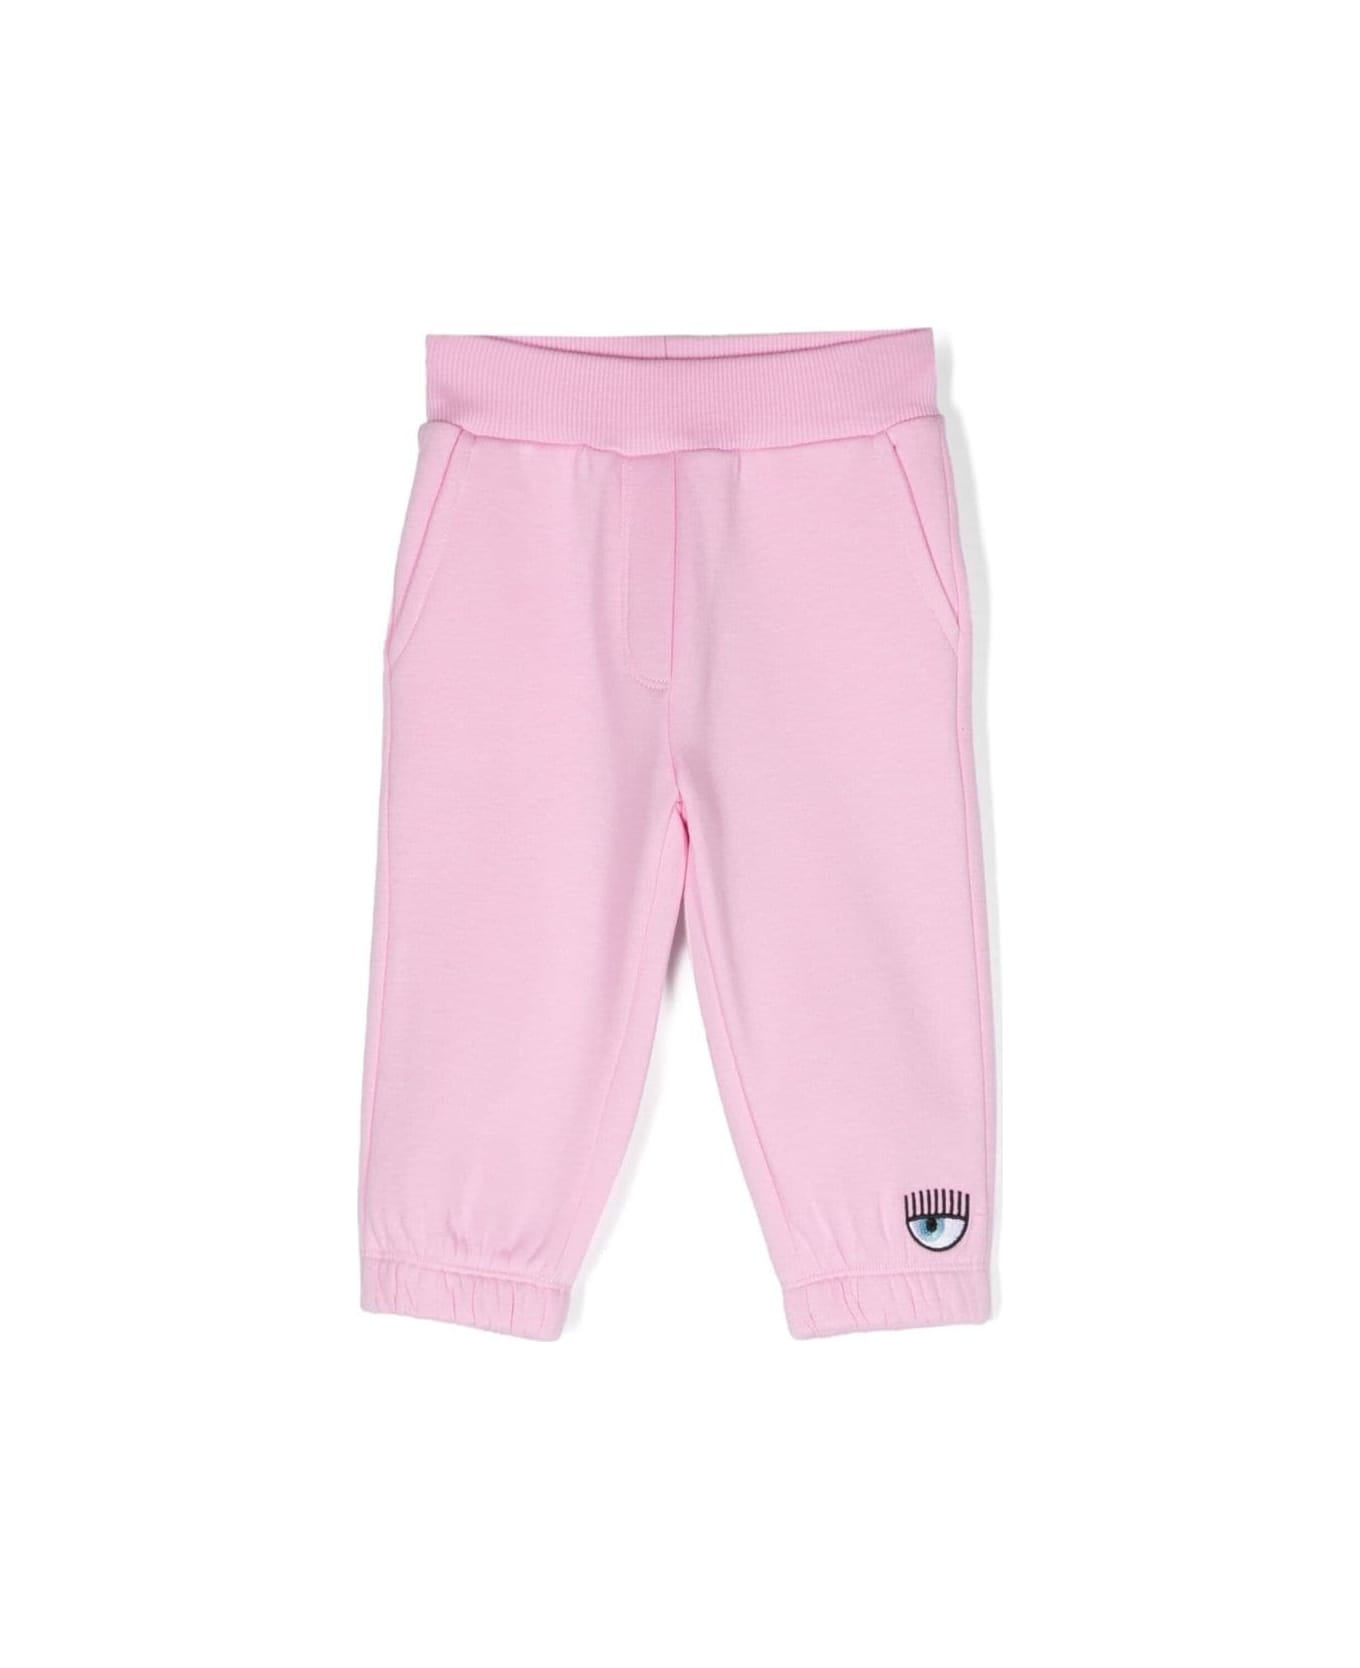 Chiara Ferragni Pink Jogger Pants With Logo Patch In Cotton Blend Baby - Pink ボトムス